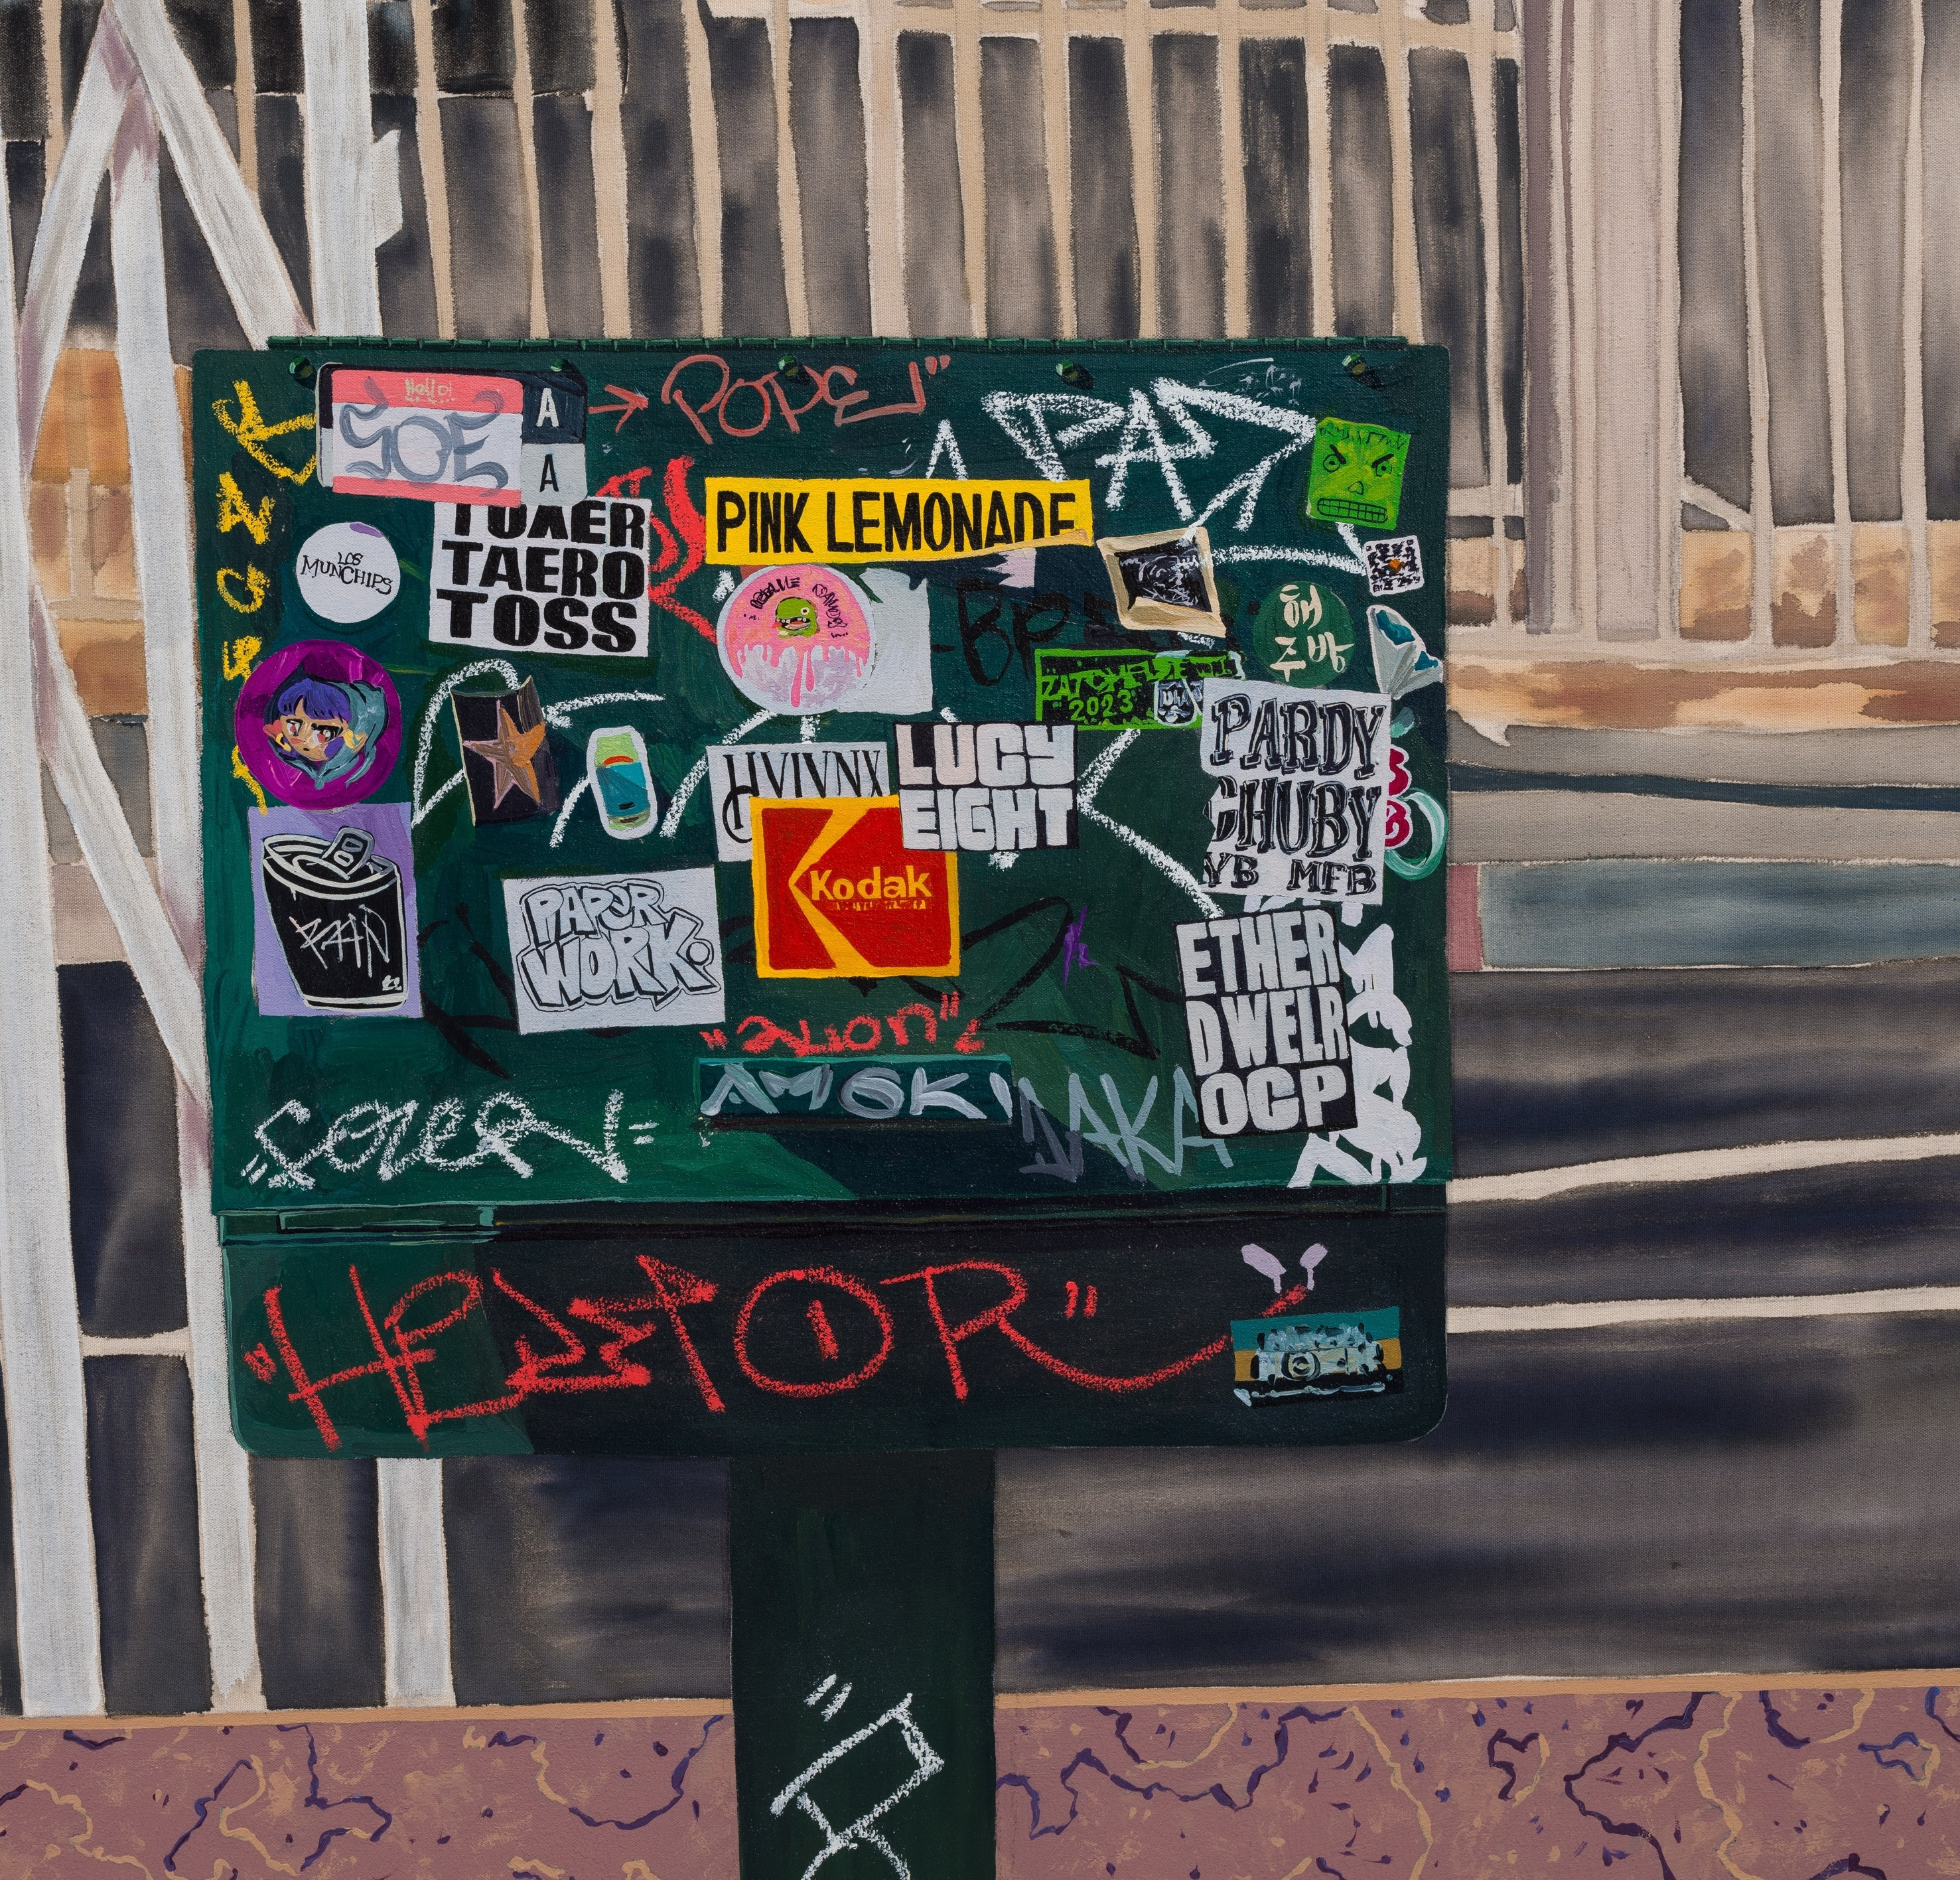 Detail of Tidawhitney Lek's "Travel Agency" depicting a mailbox covered in stickers and graffiti.